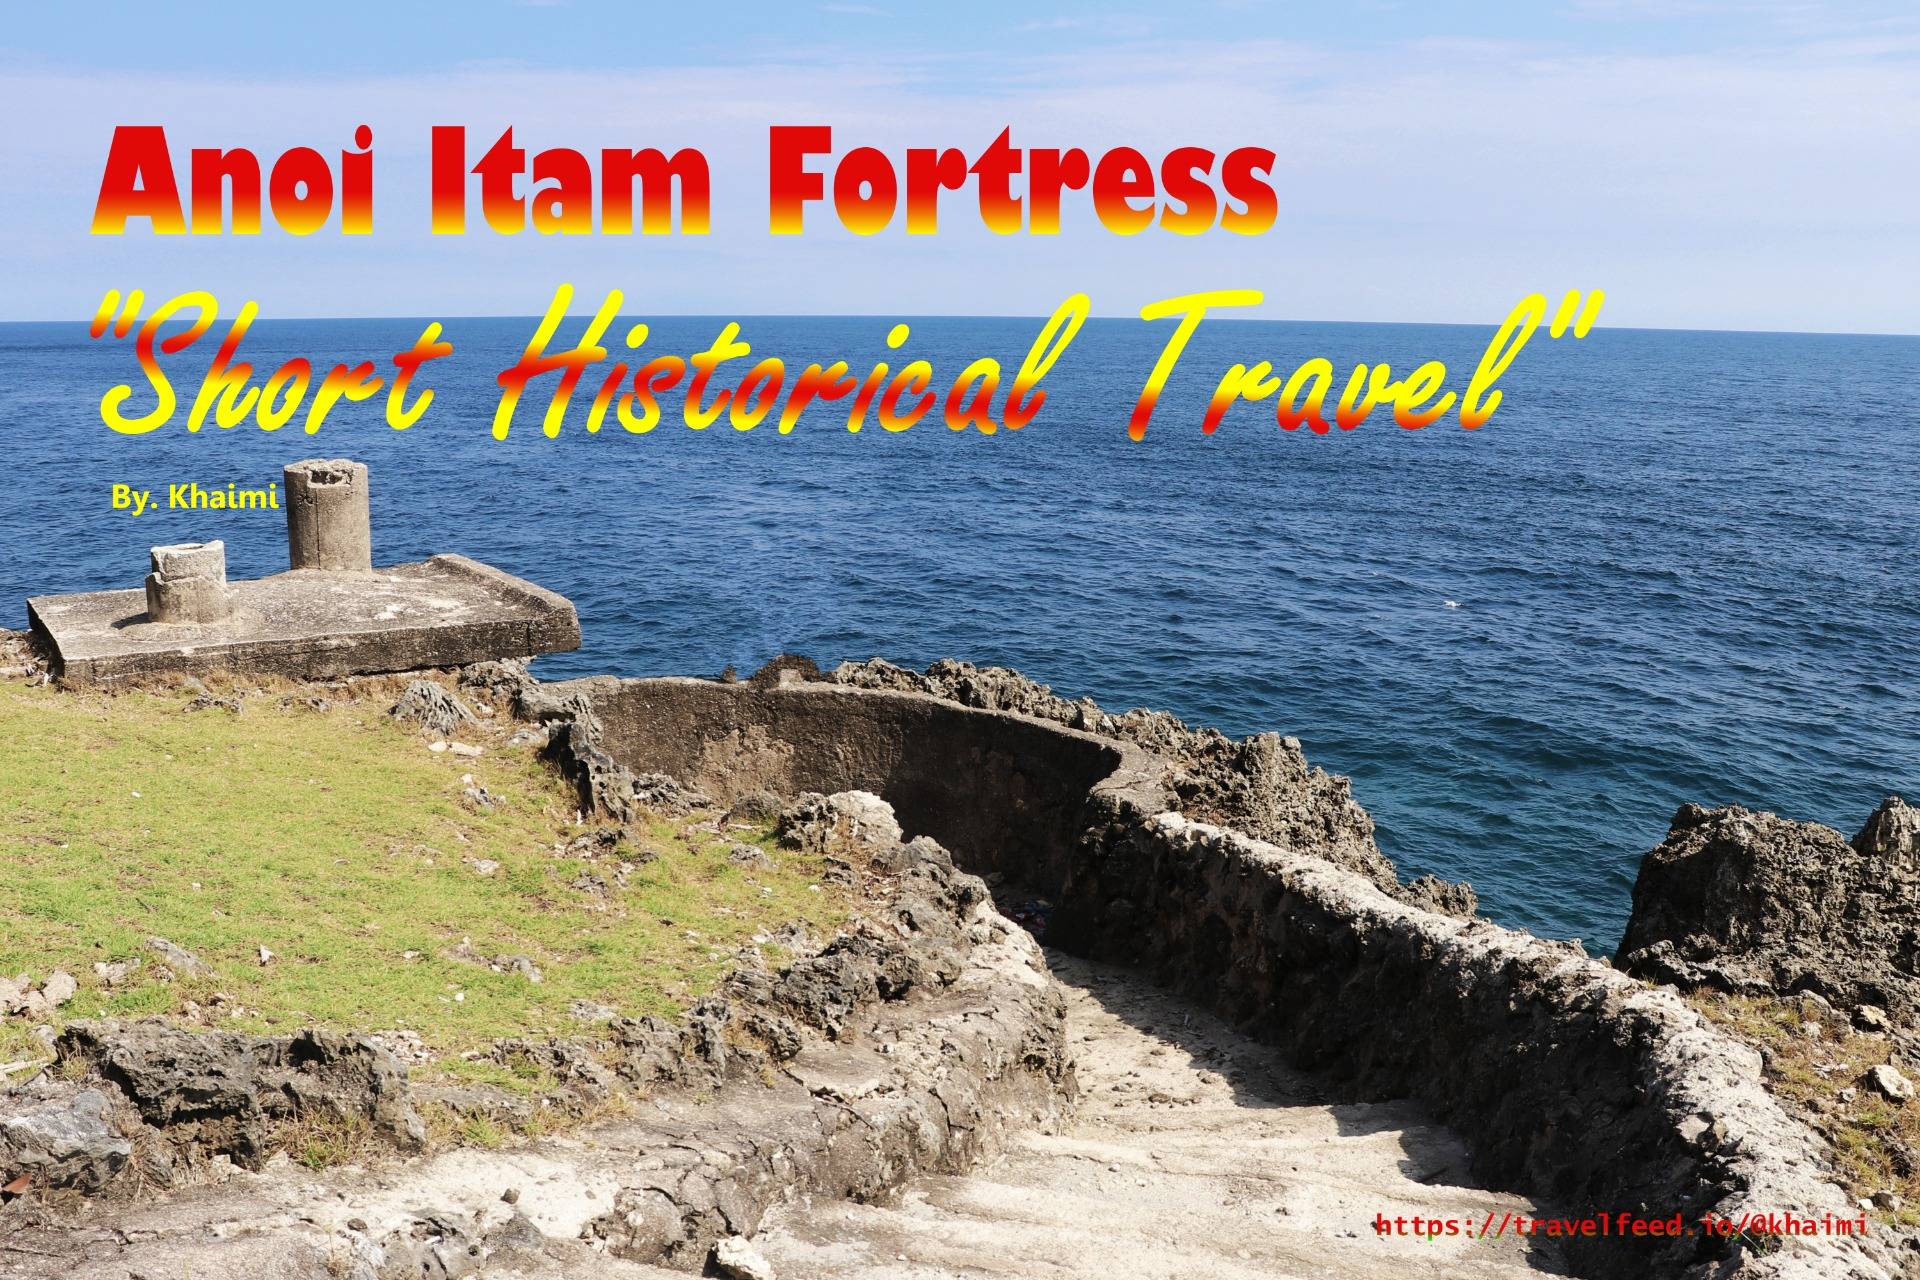 Anoi Itam Fortress : Just Short Travel But Get Full History